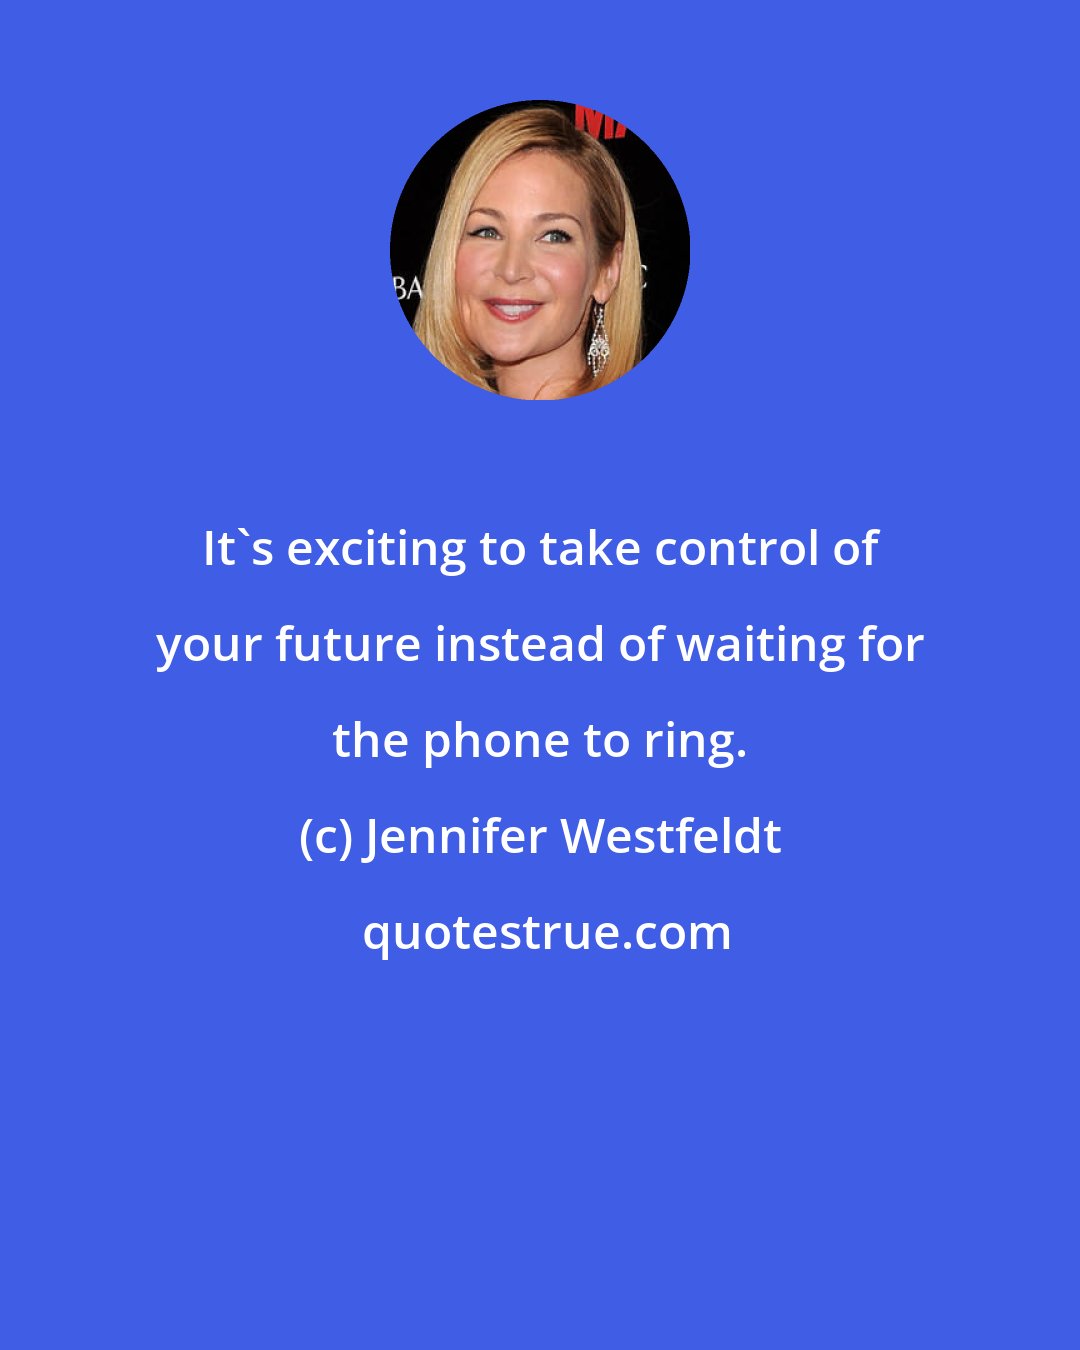 Jennifer Westfeldt: It's exciting to take control of your future instead of waiting for the phone to ring.